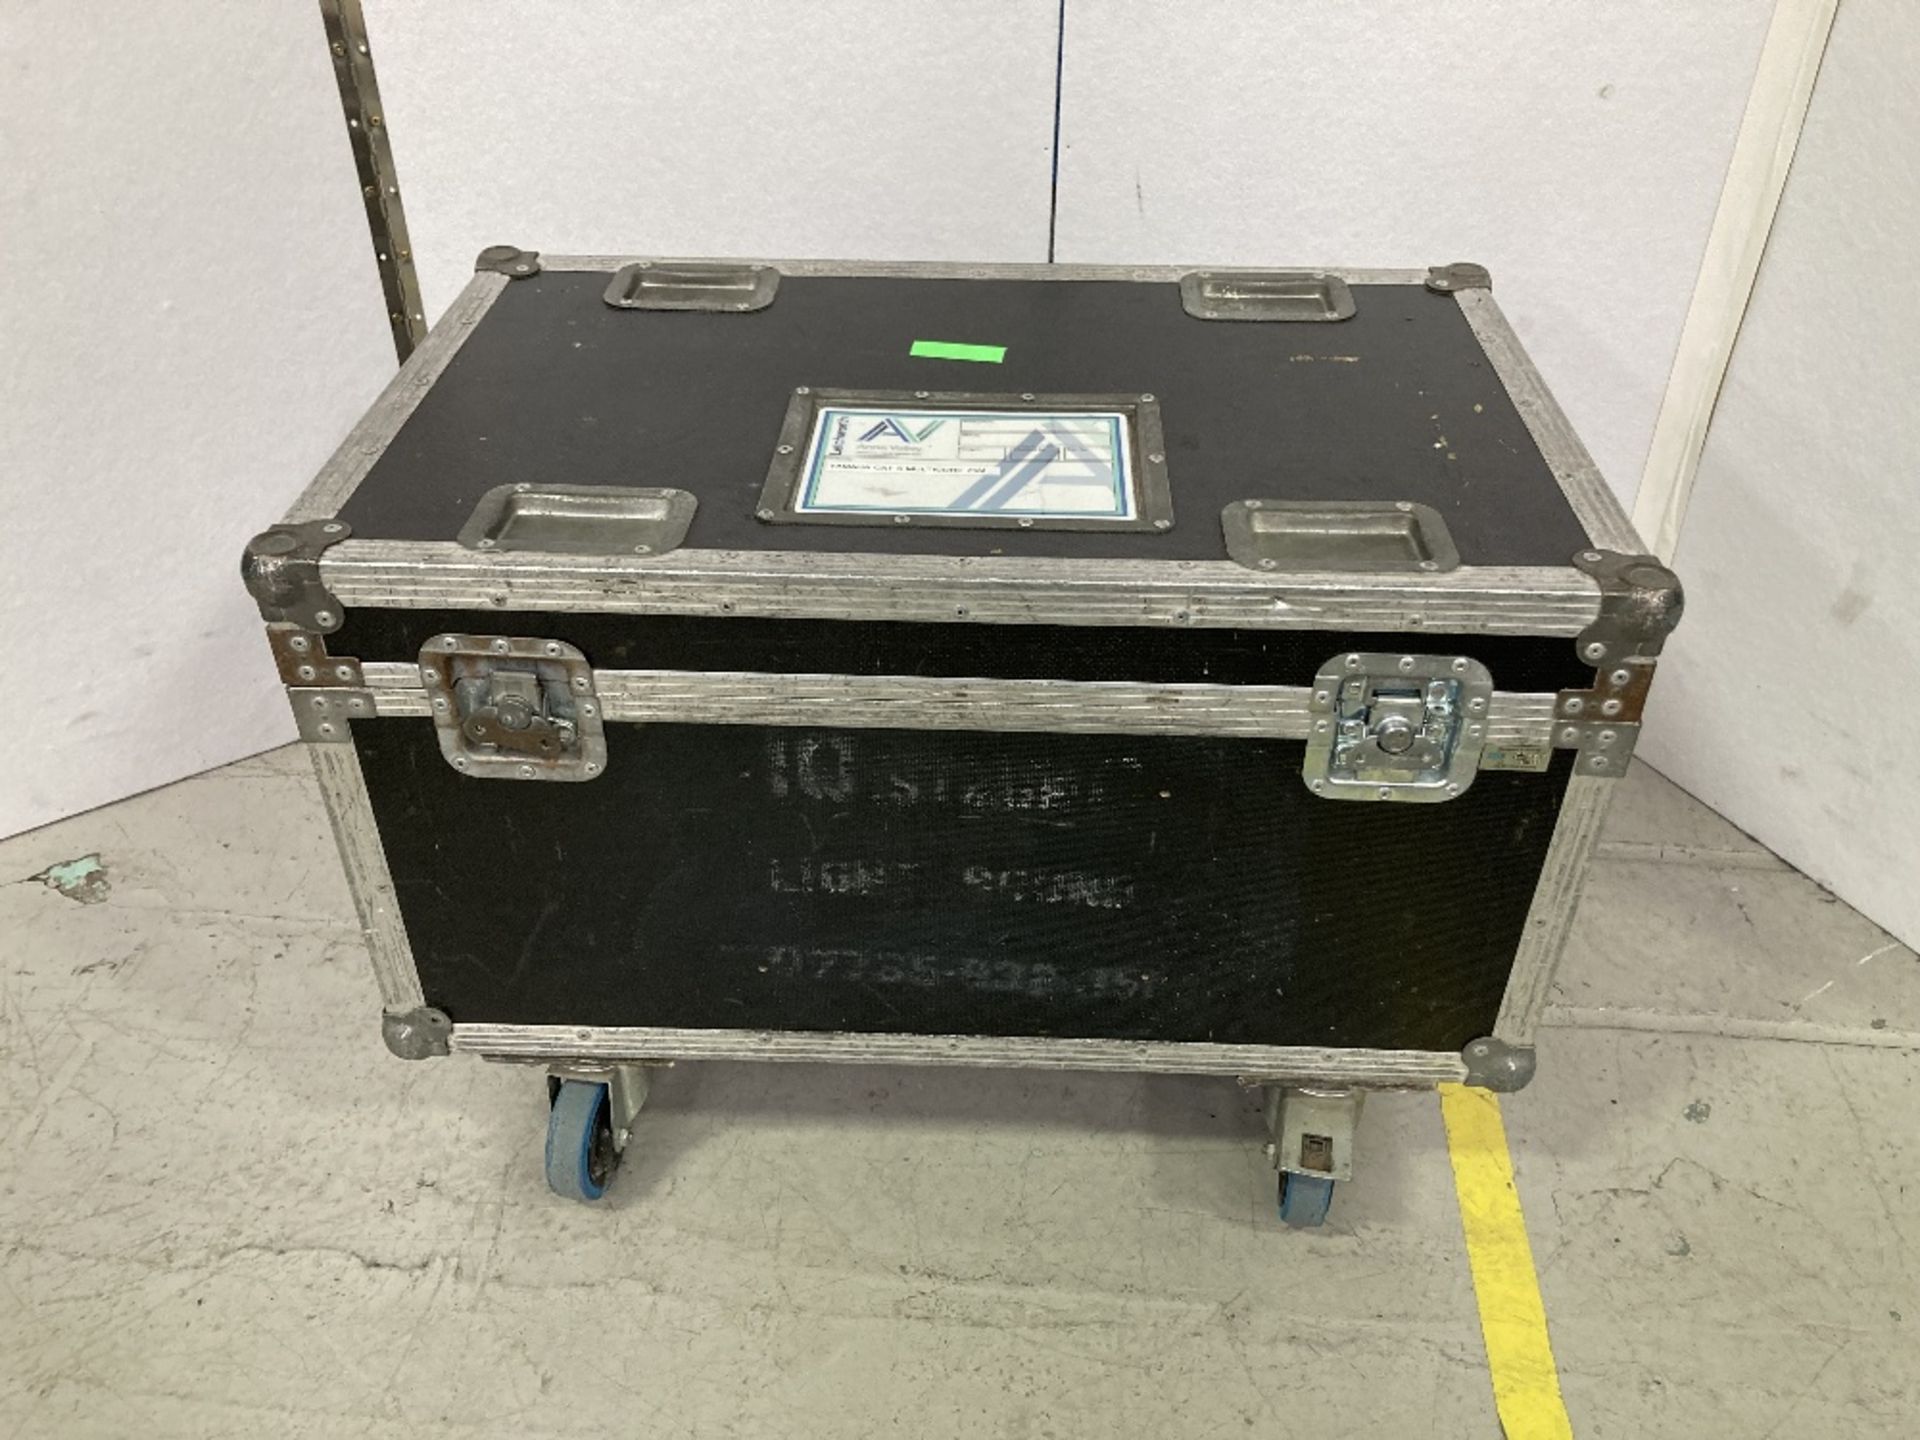 Yamaha CAT 5 Multicore 75mtrs, Power Cable & Heavy Duty Mobile Flight Case - Image 5 of 5